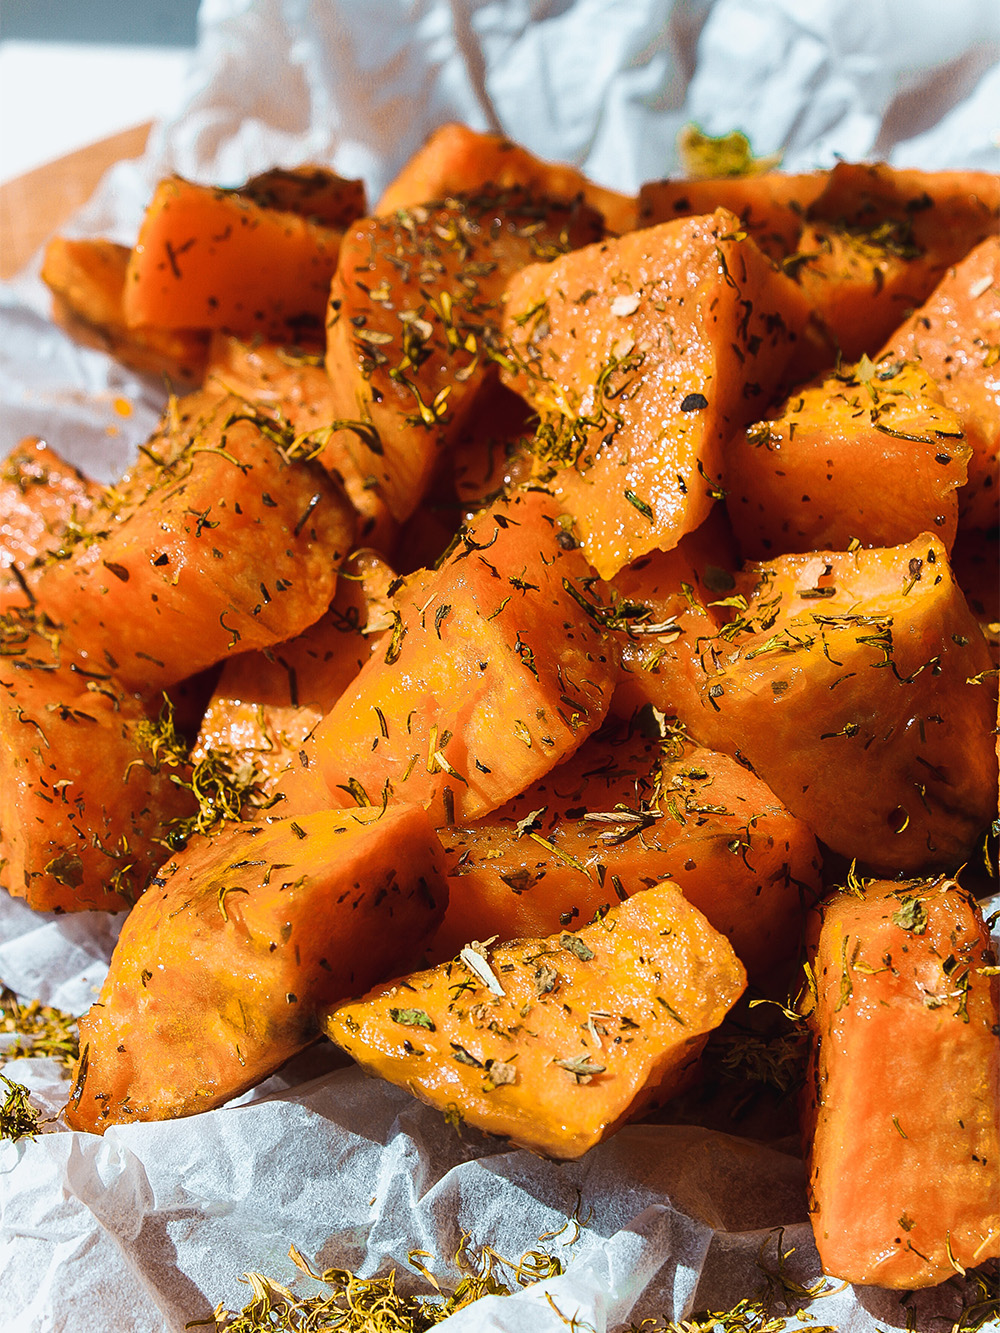 Staple superfoods that are worth your money - Sweet potatoes